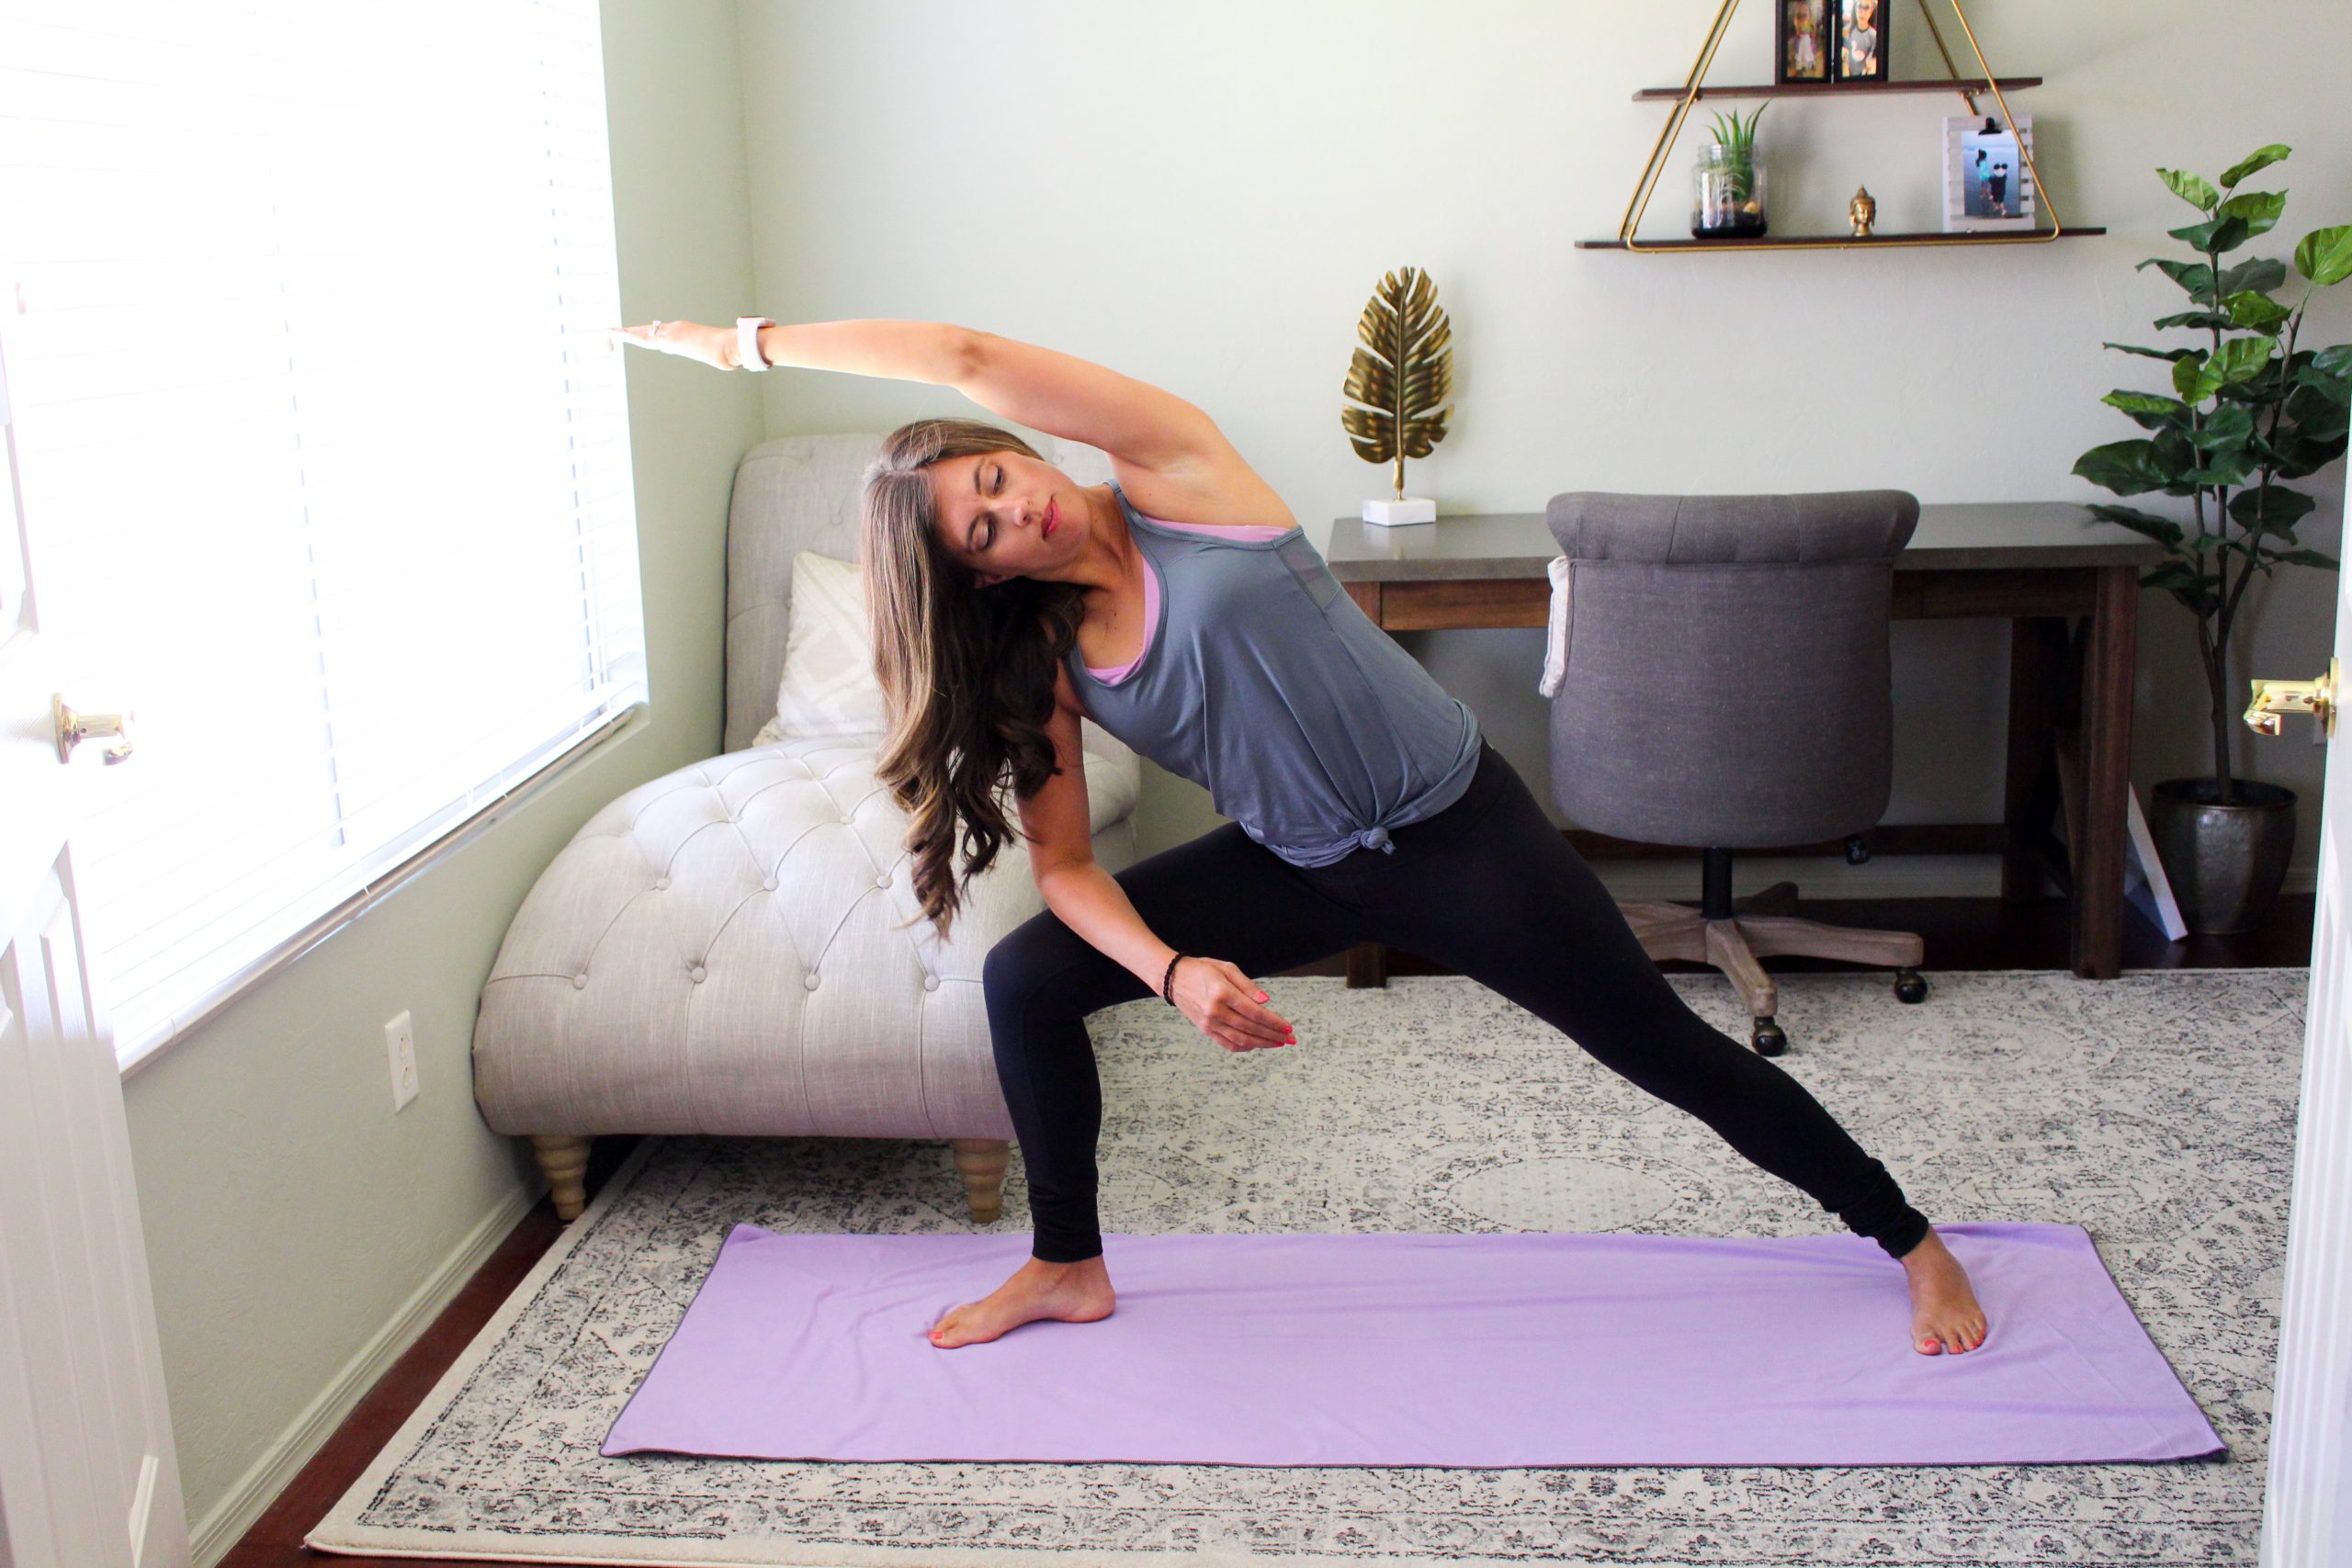 15-Minute Pilates Stretch Work out